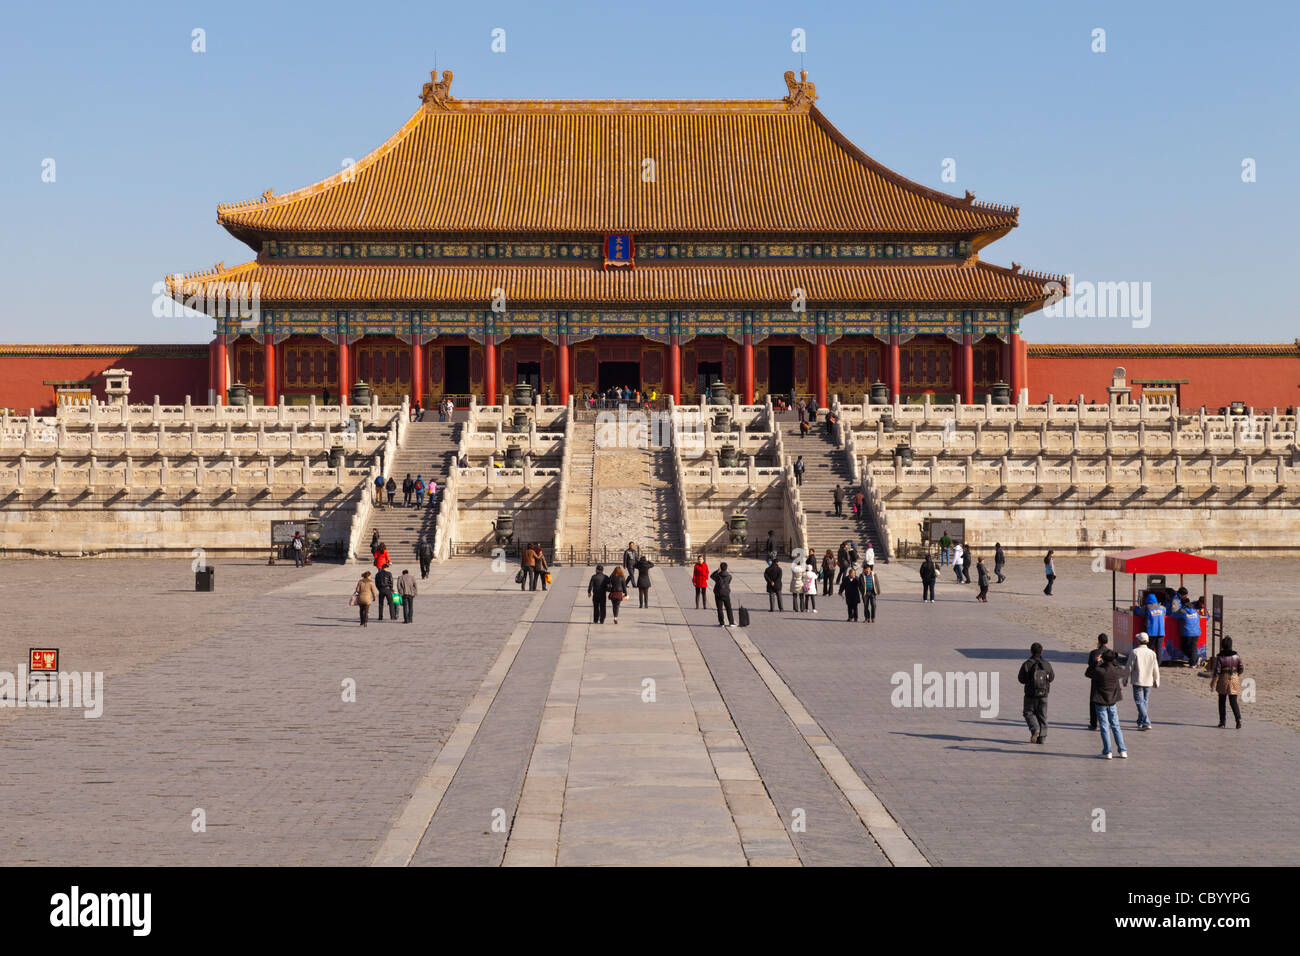 The Hall of Supreme Harmony in the Forbidden City, Beijing, from the Gate of Supreme Harmony. Stock Photo